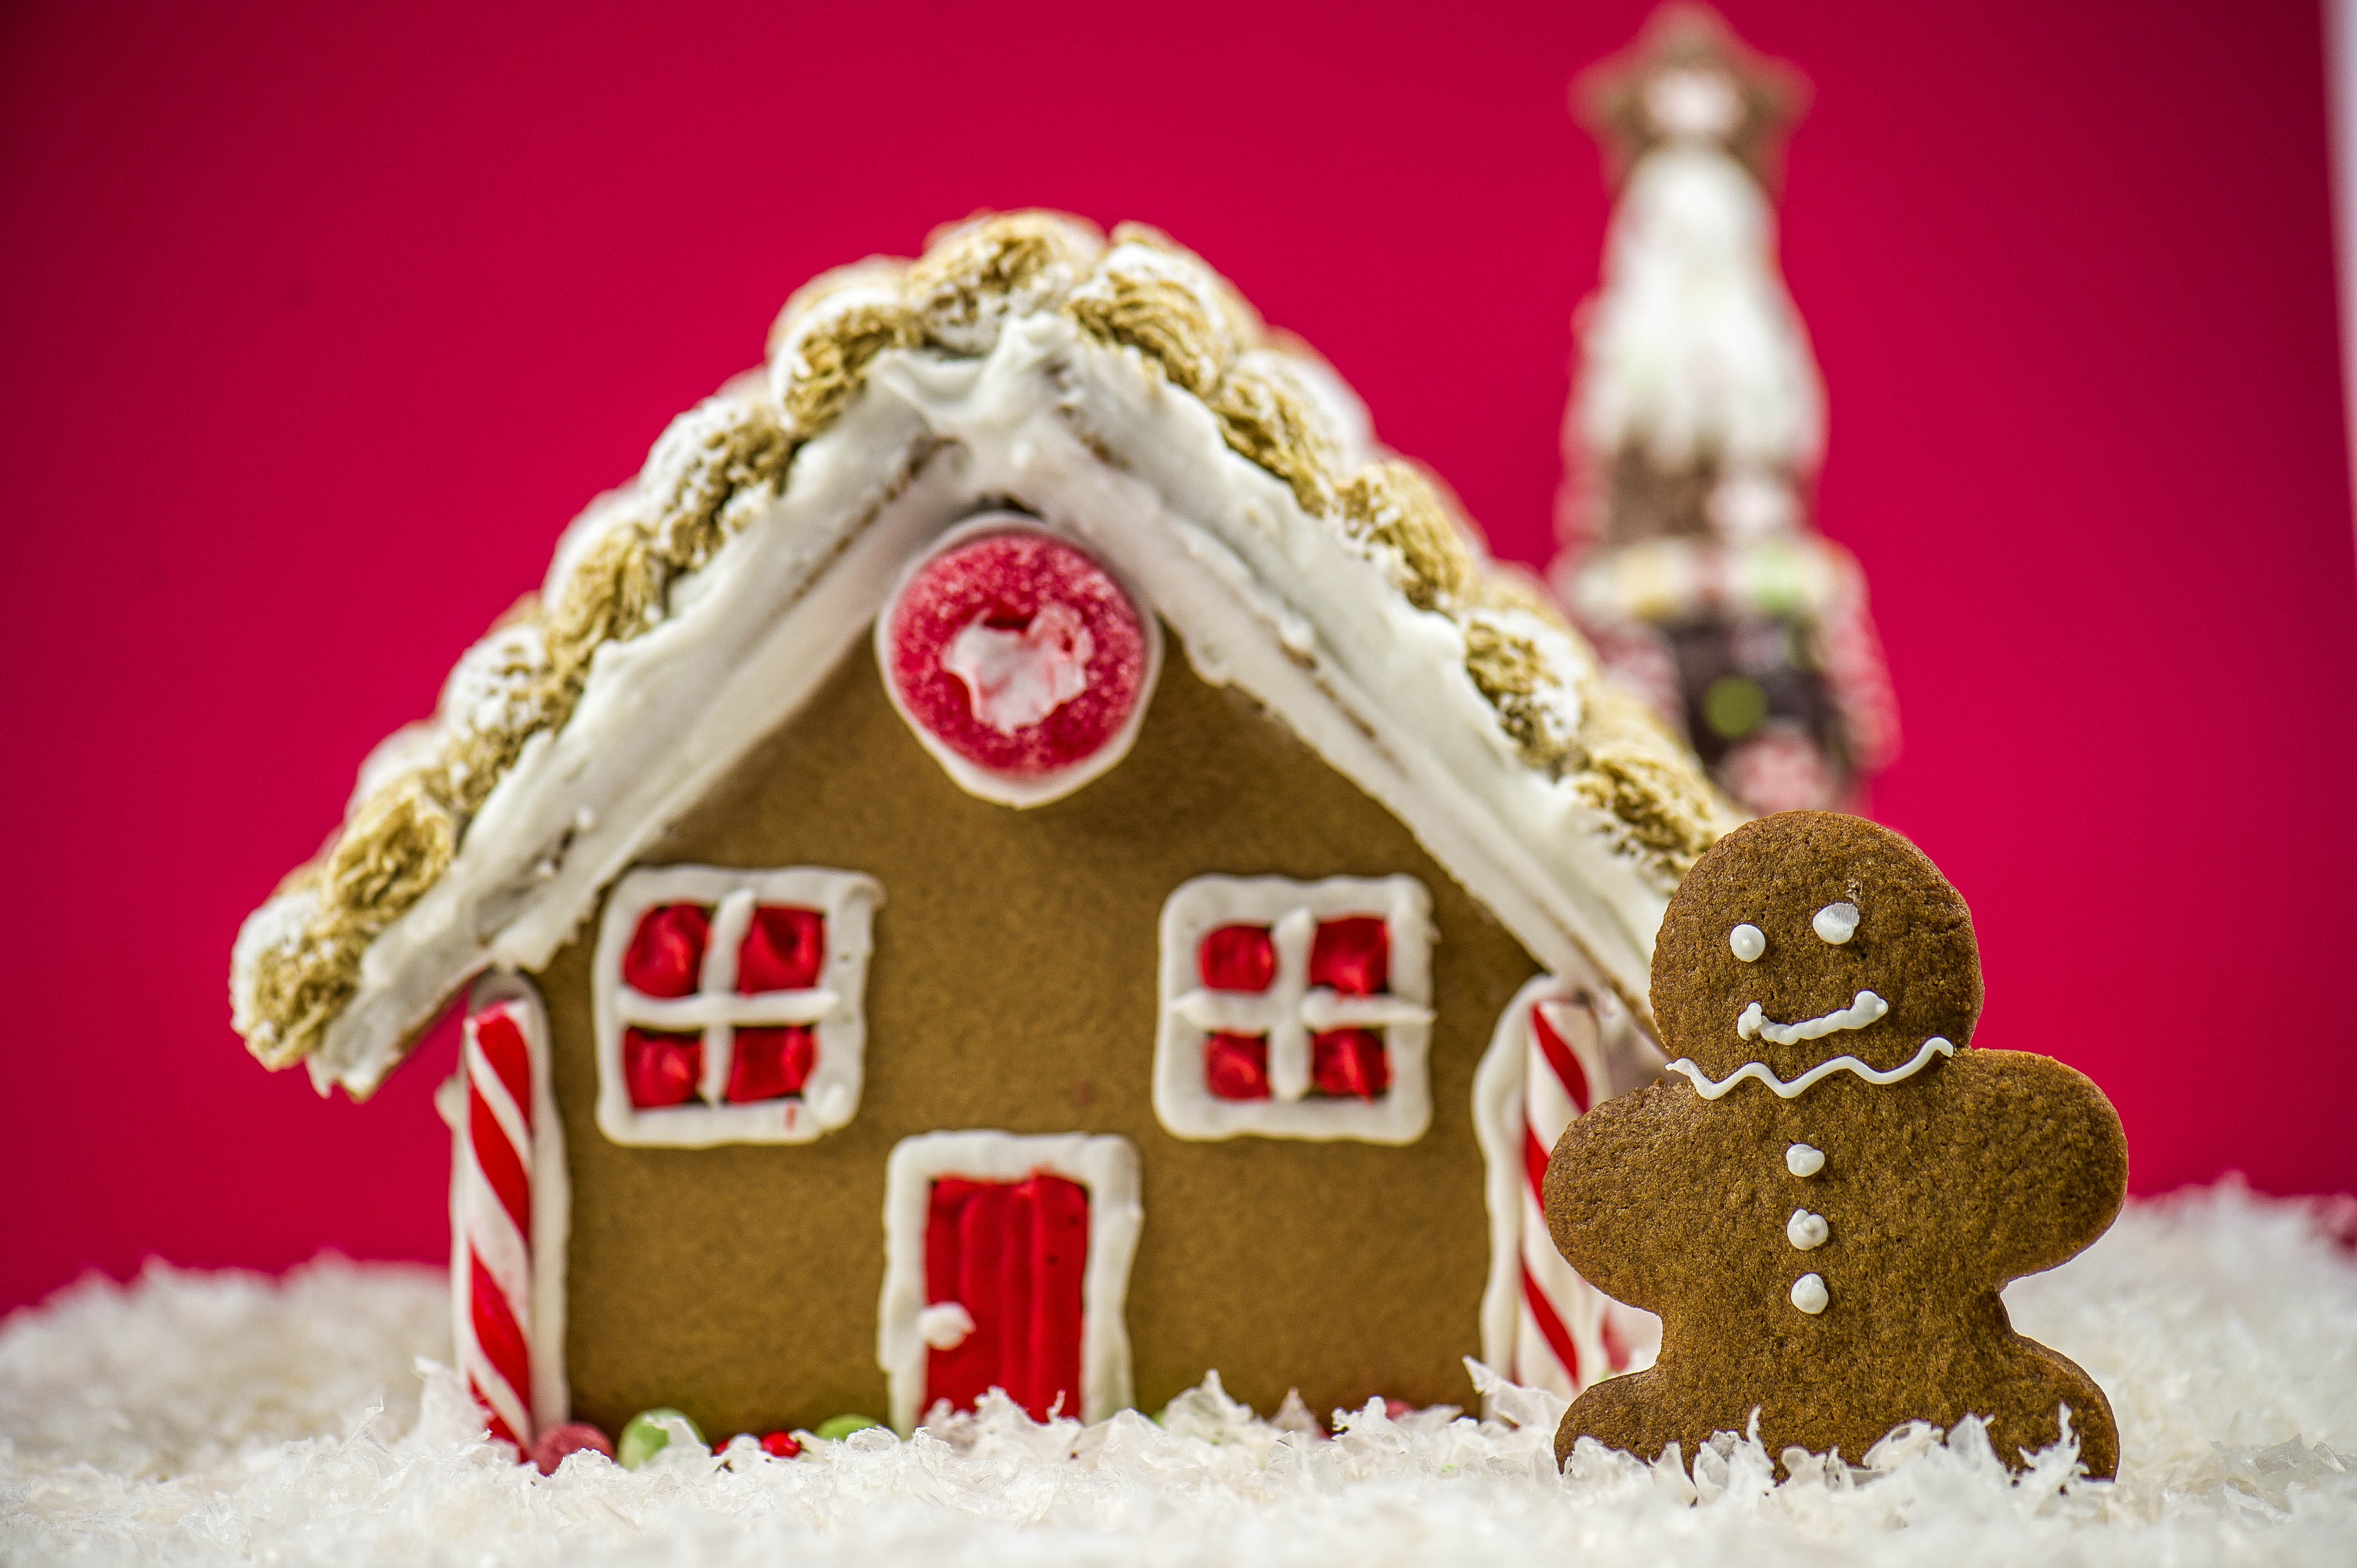 Gingerbread House Day - Now there is a day set aside for a favorite Christmas pastime when families get together and build a Gingerbread House.